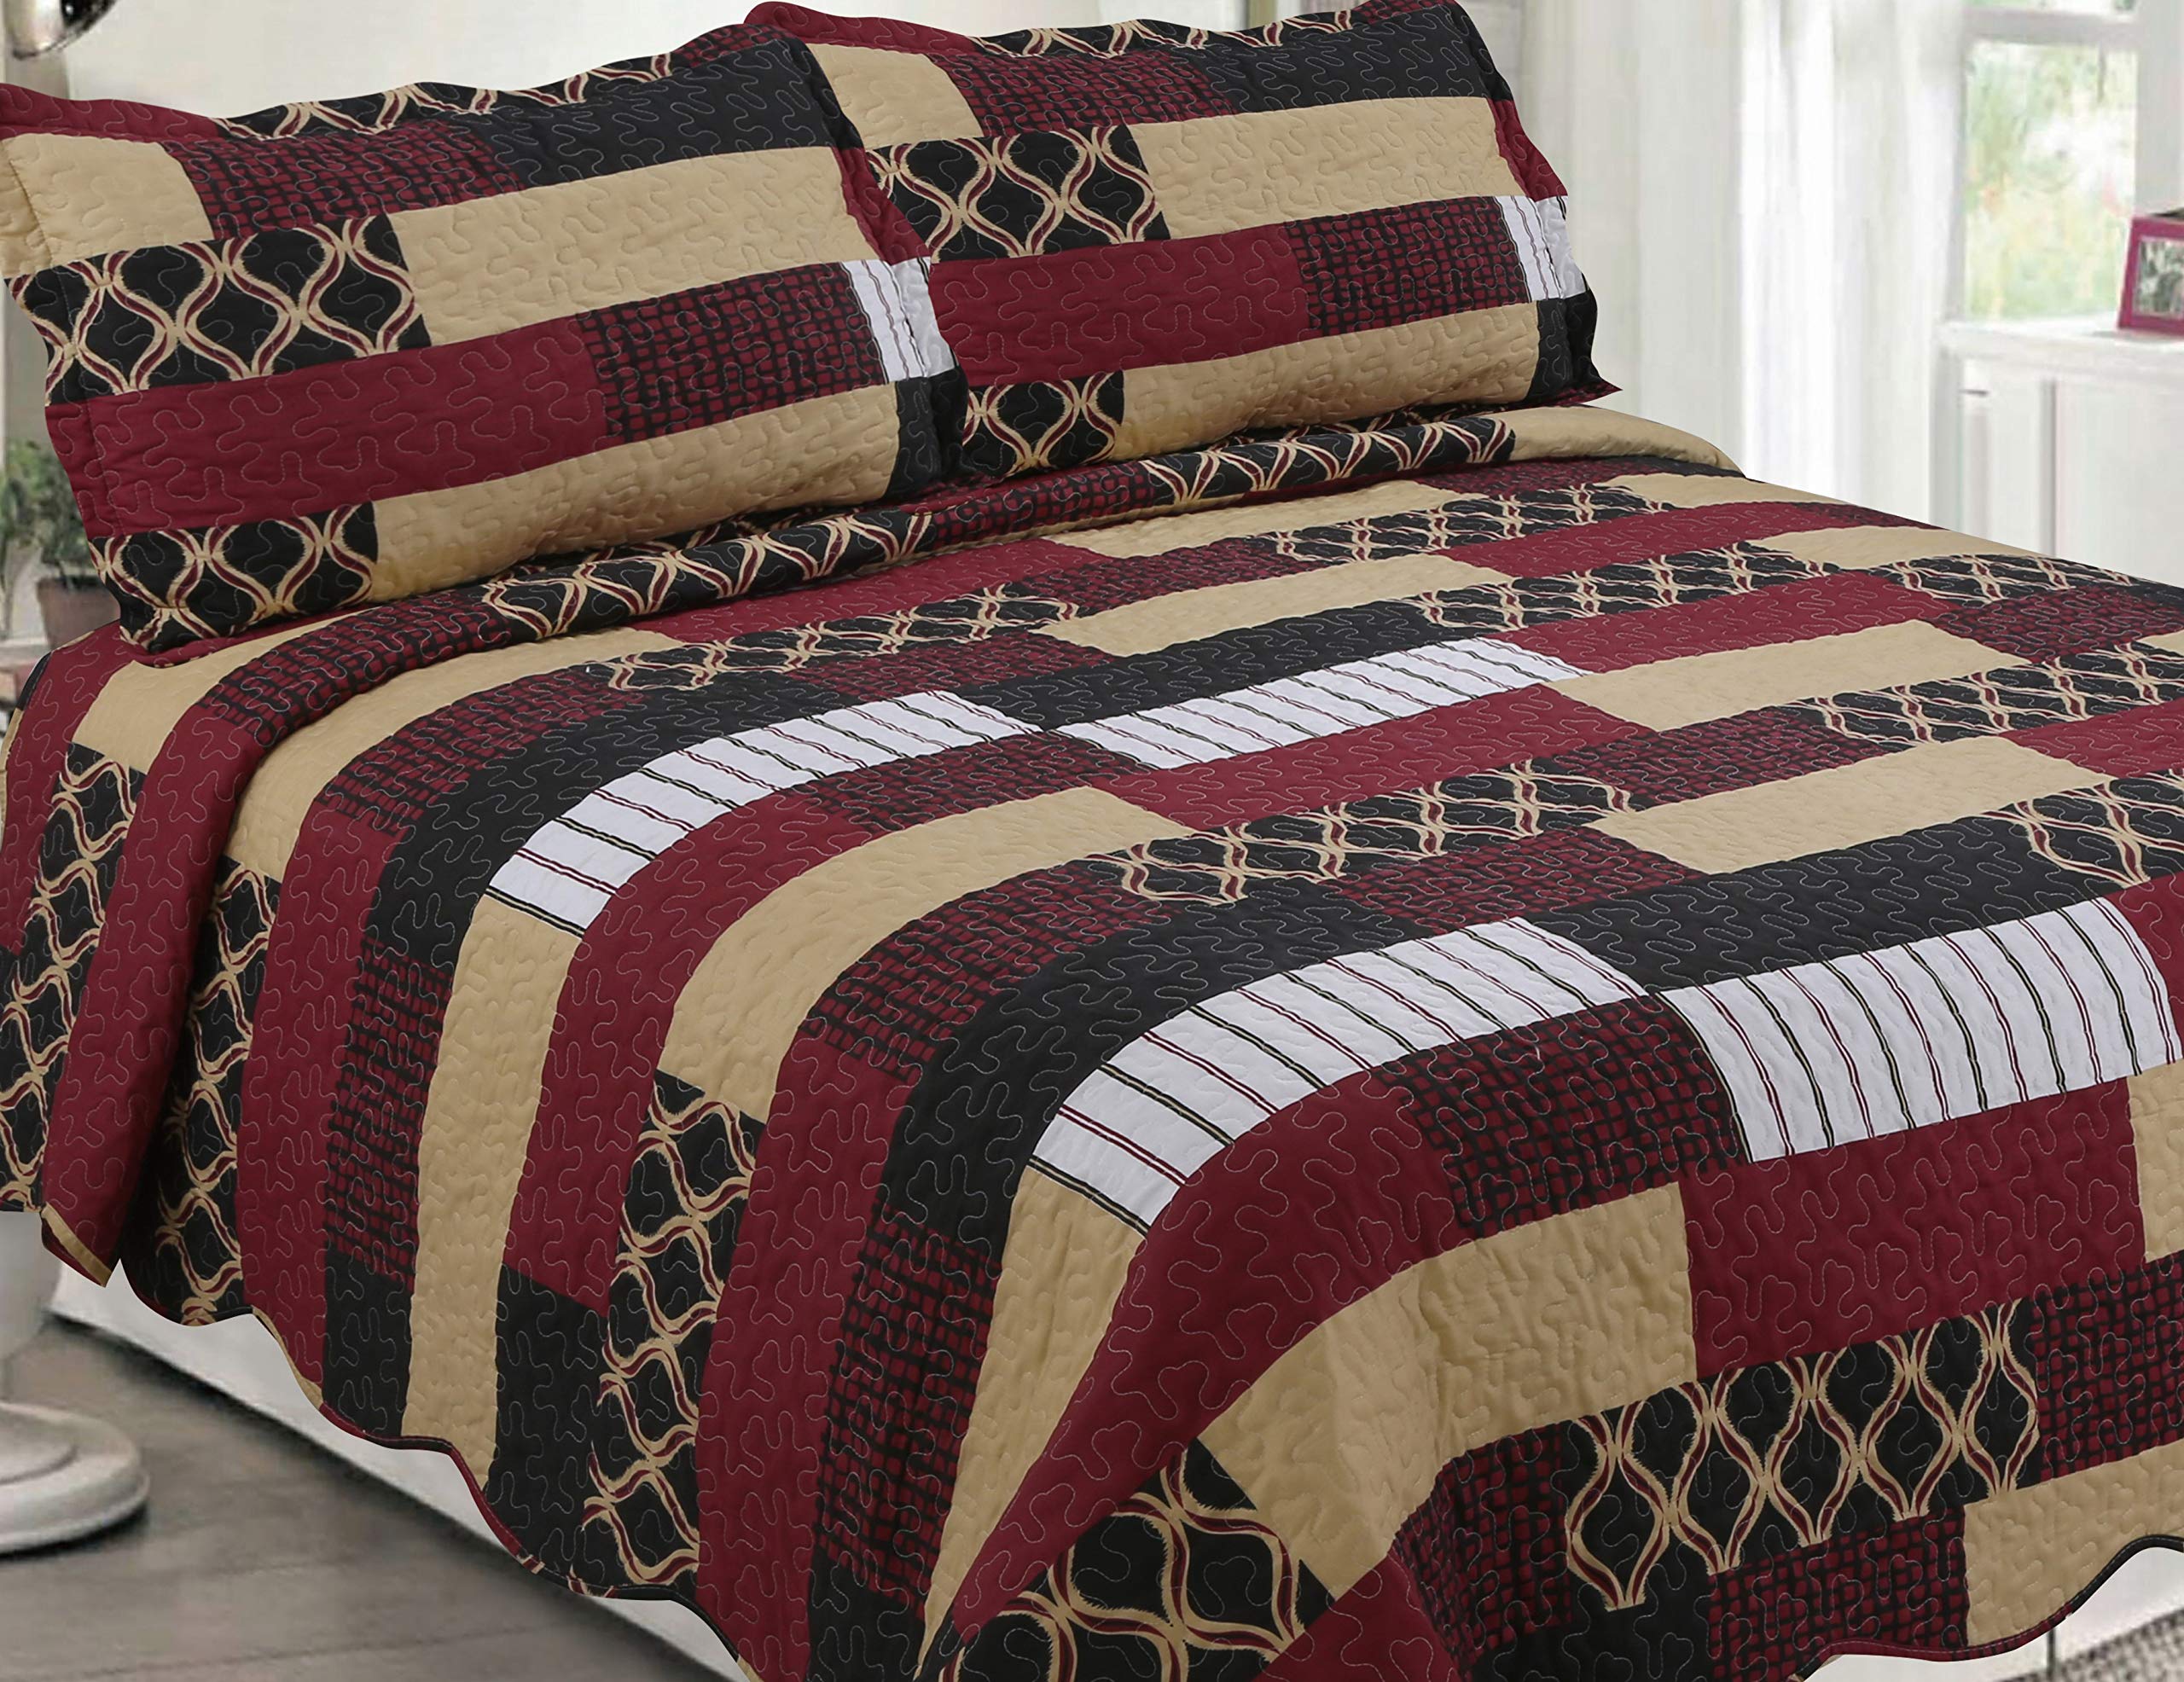 Book Cover Sapphire Home 3 Piece King Size Bedspread Coverlet Quilt Bedding Set w/2 Pillow Shams, South Western Design Black Brown Burgundy, King XJ1100 Western-black-brown King